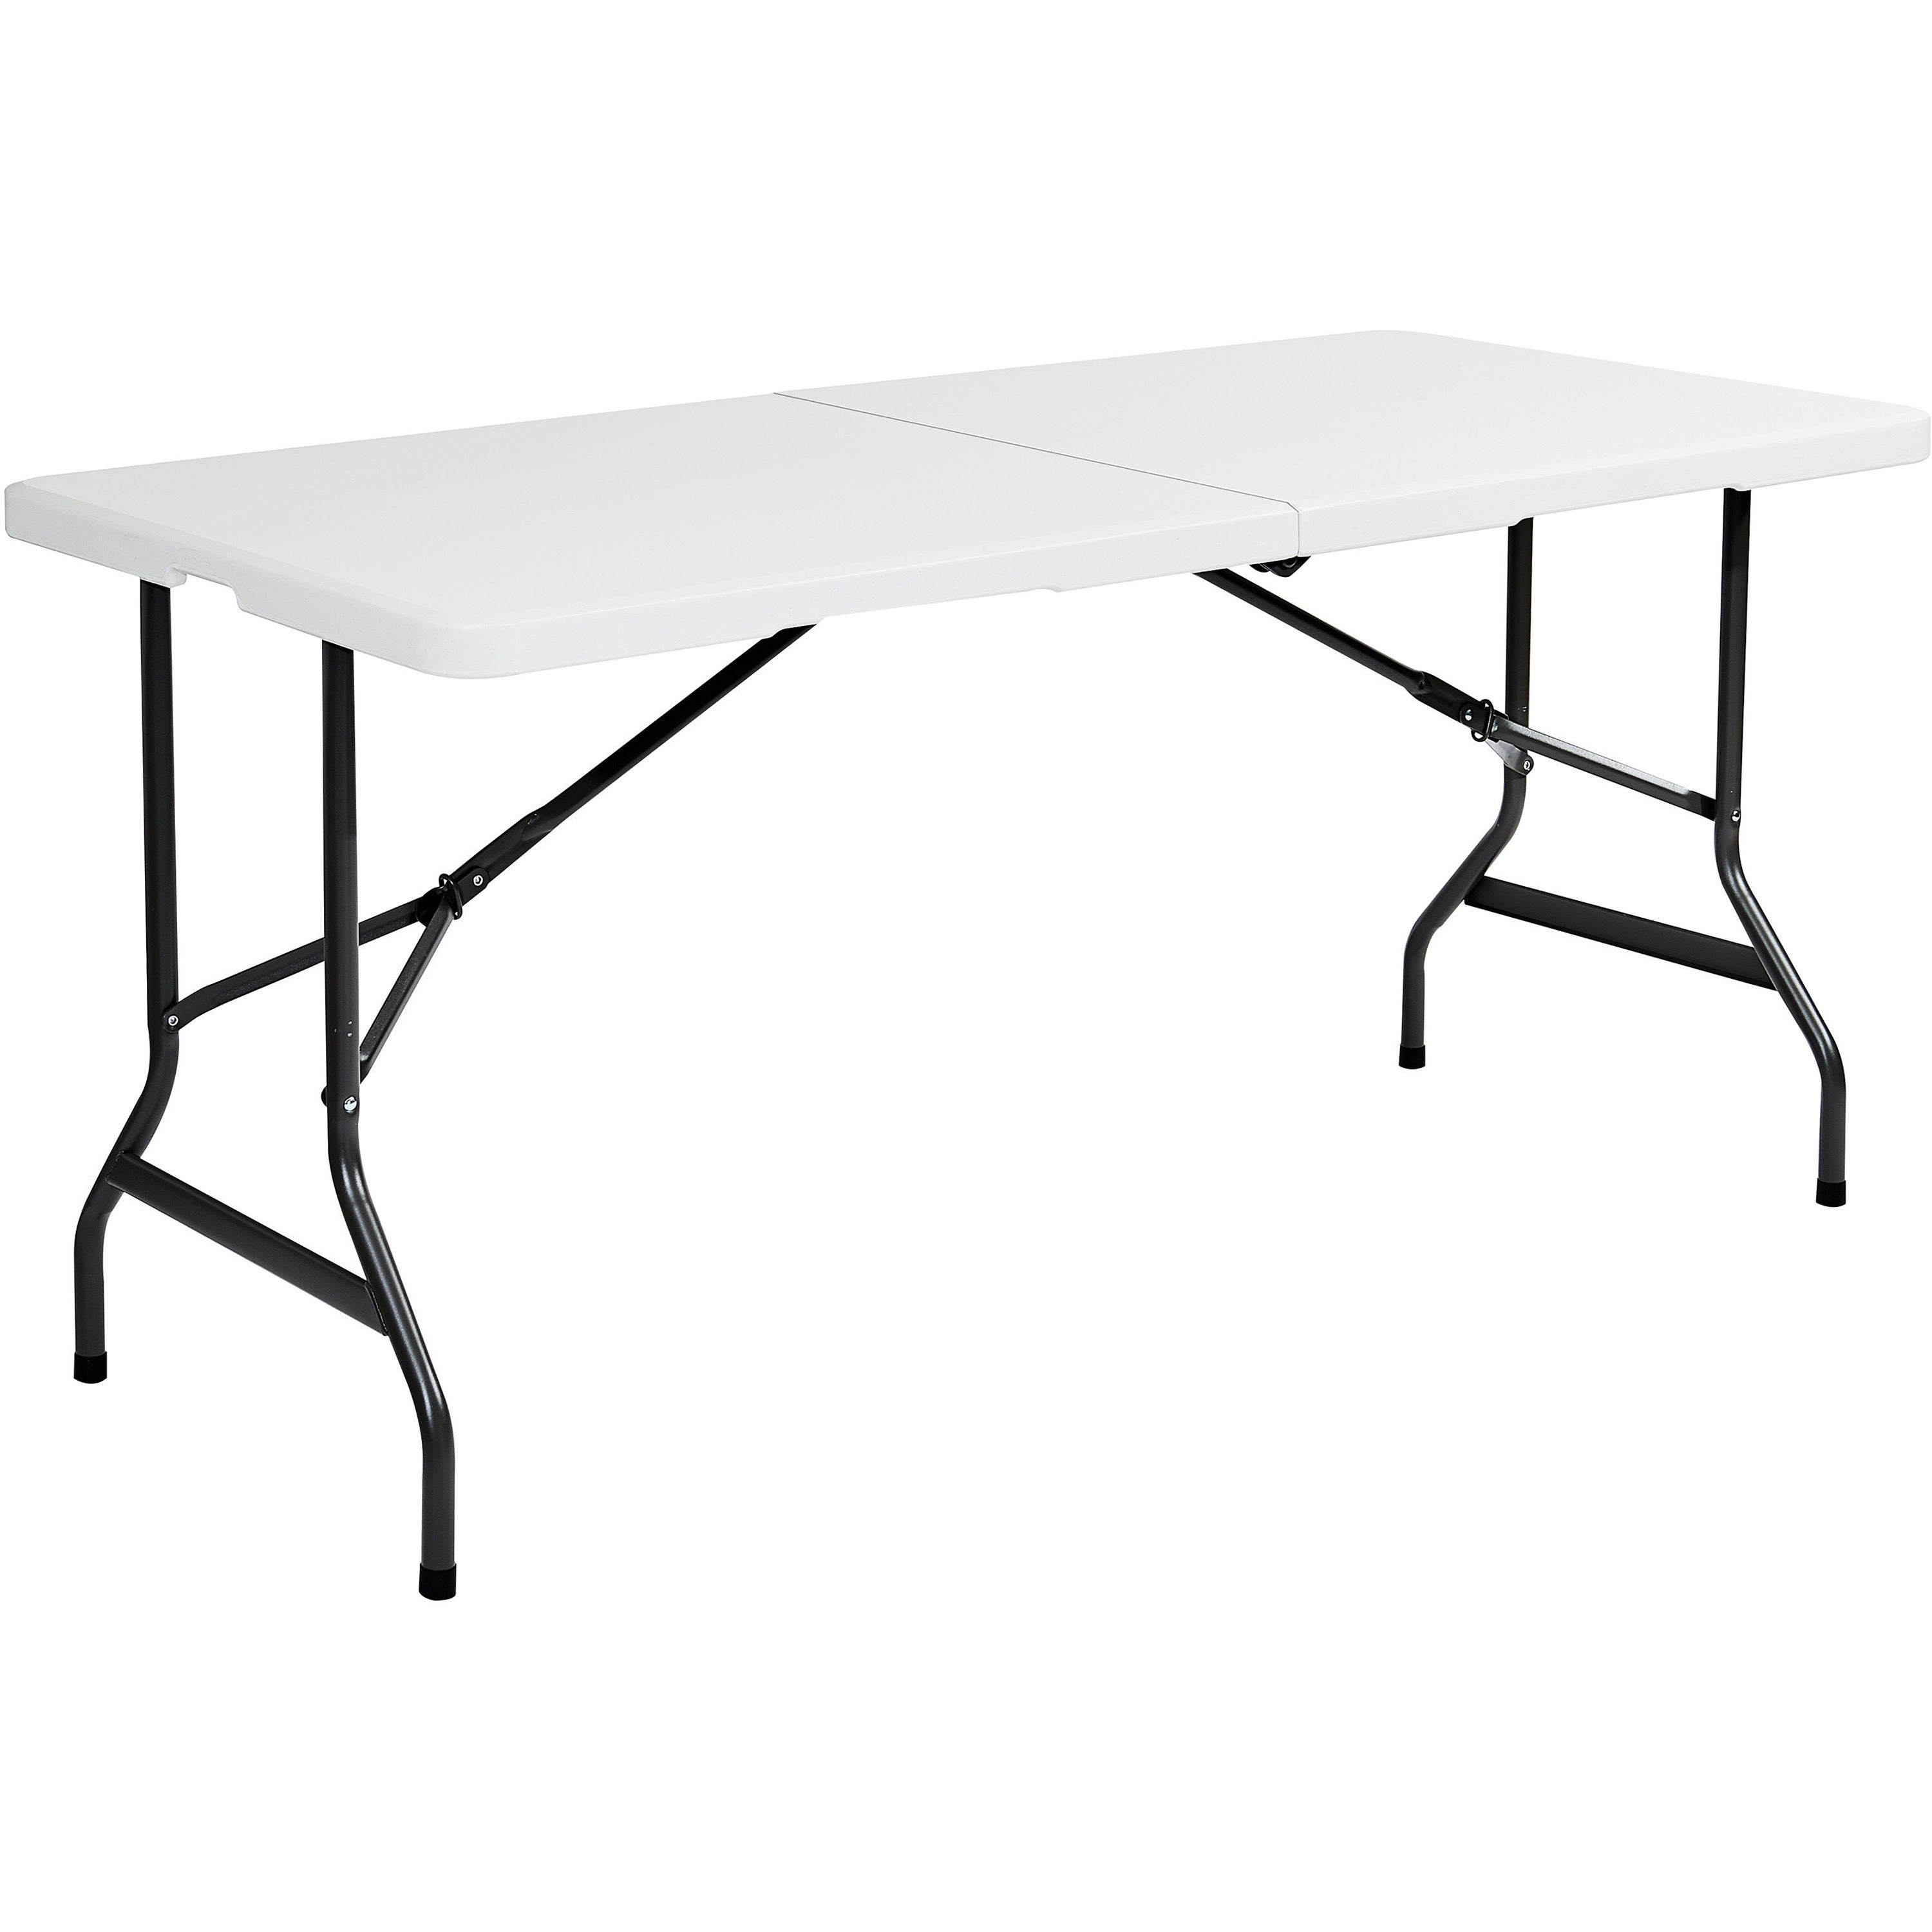 Iceberg IndestrucTable TOO Bifold Table - For - Table TopRectangle Top - Adjustable Height - 72" Table Top Length x 30" Table Top Width x 2" Table Top Thickness - 29" Height - Platinum, Powder Coated - Tubular Steel - 1 Each - 